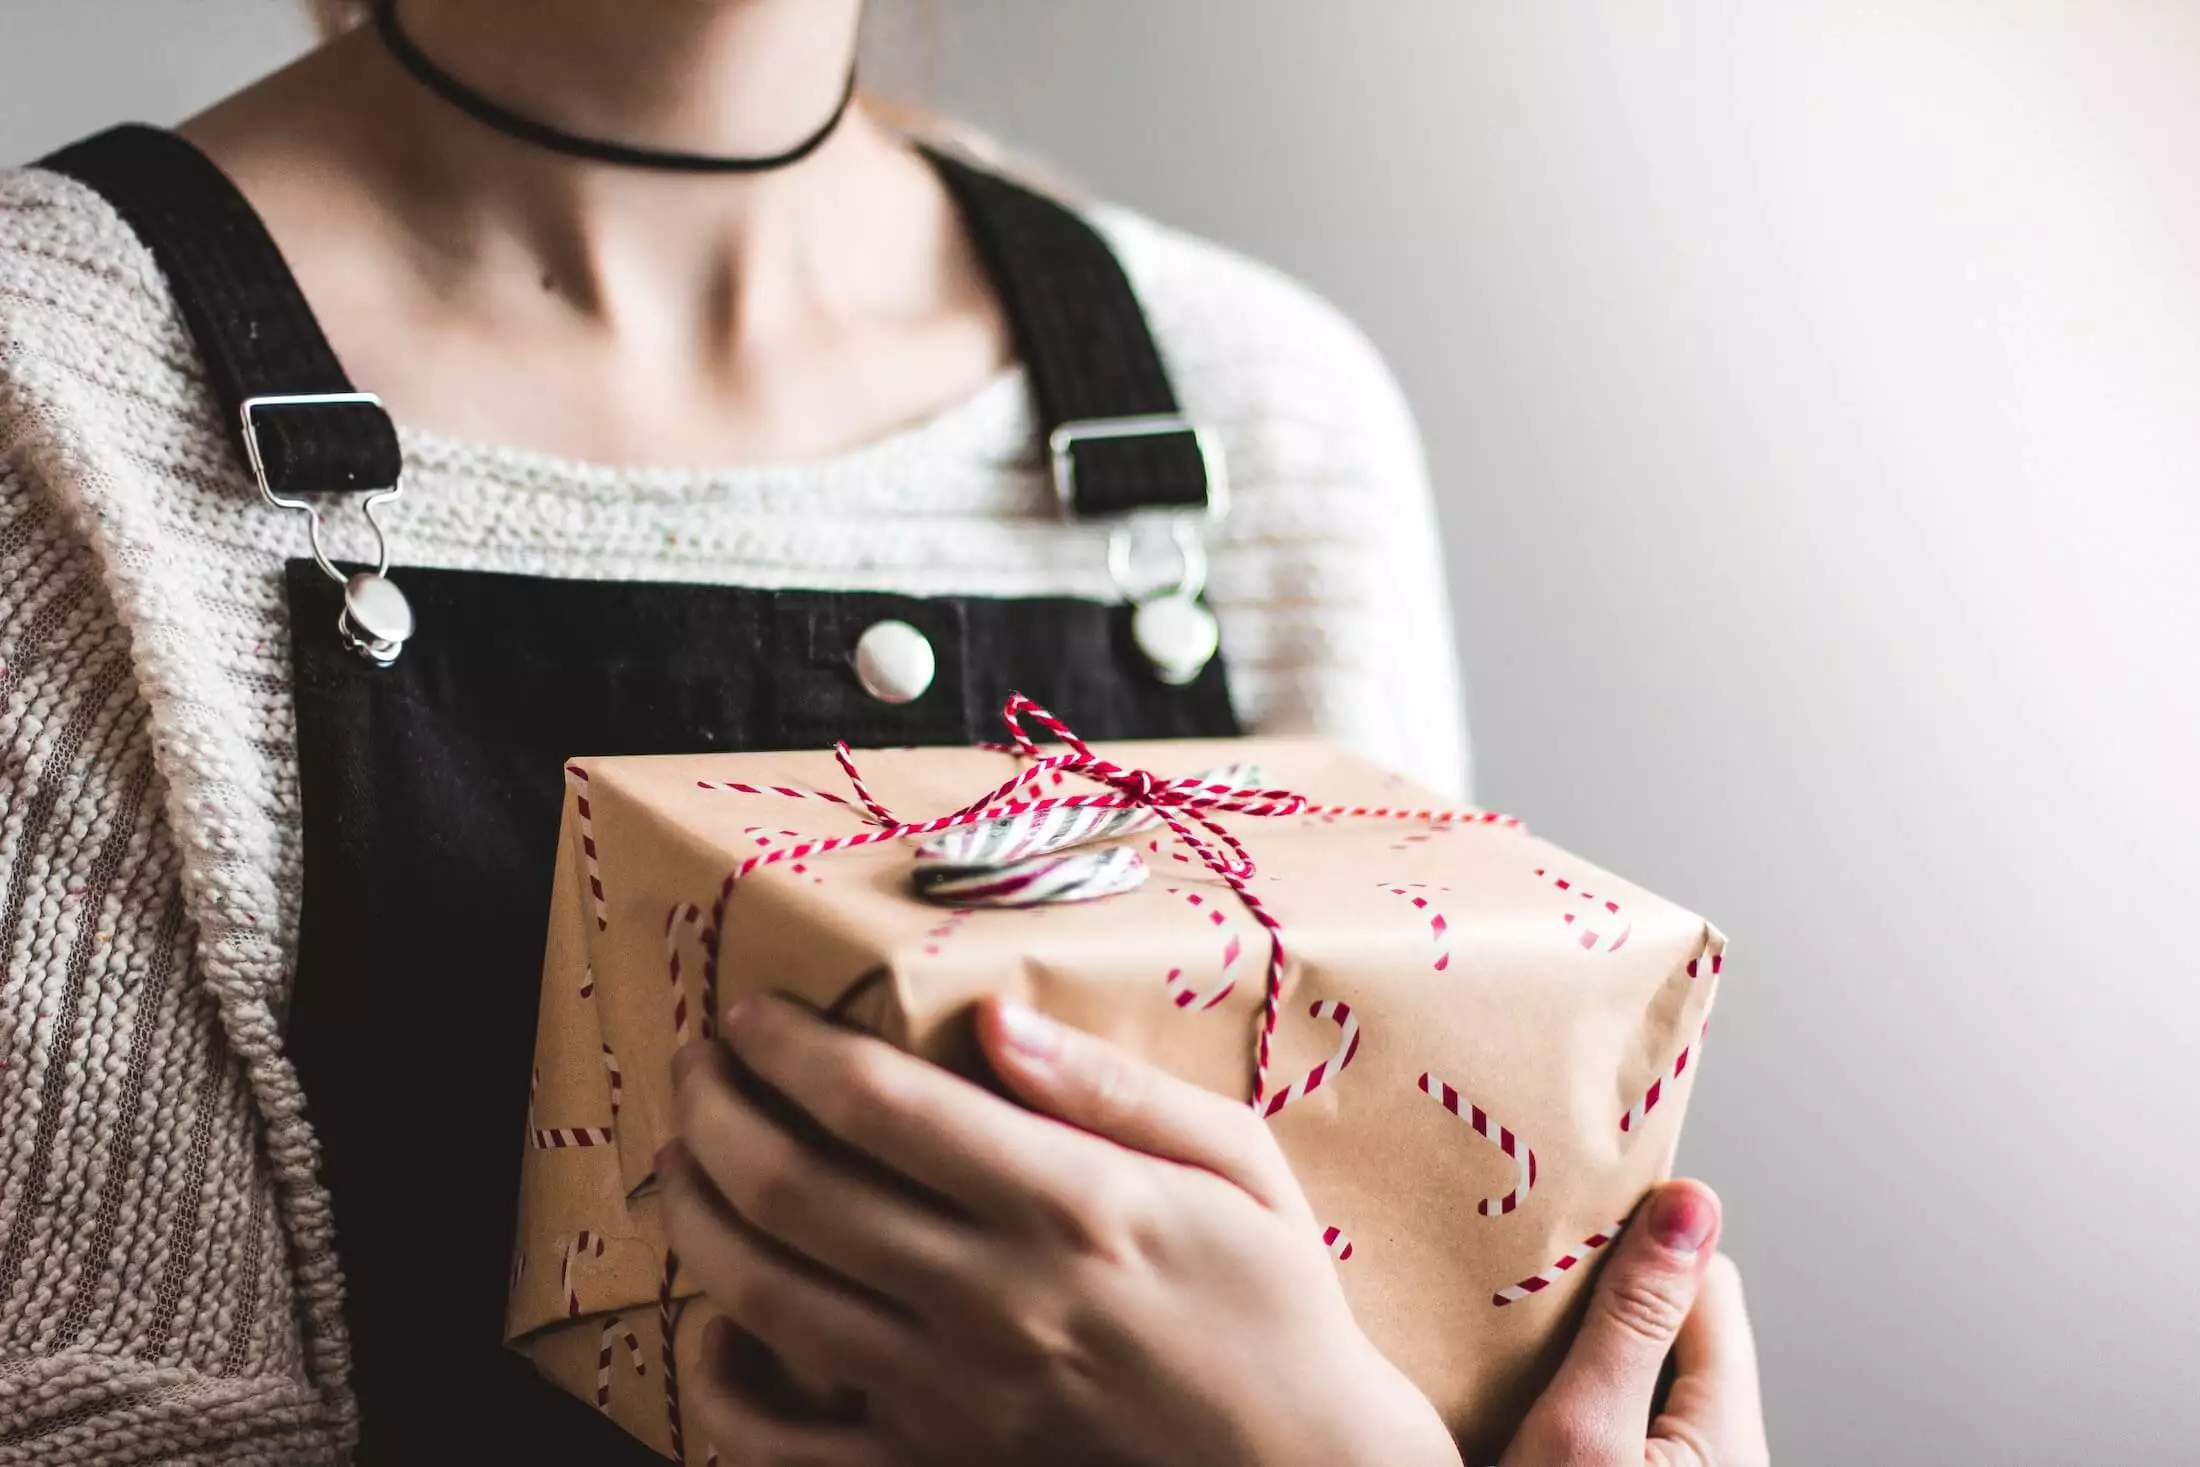 141 wellness-inspired gift ideas for everyone on your list